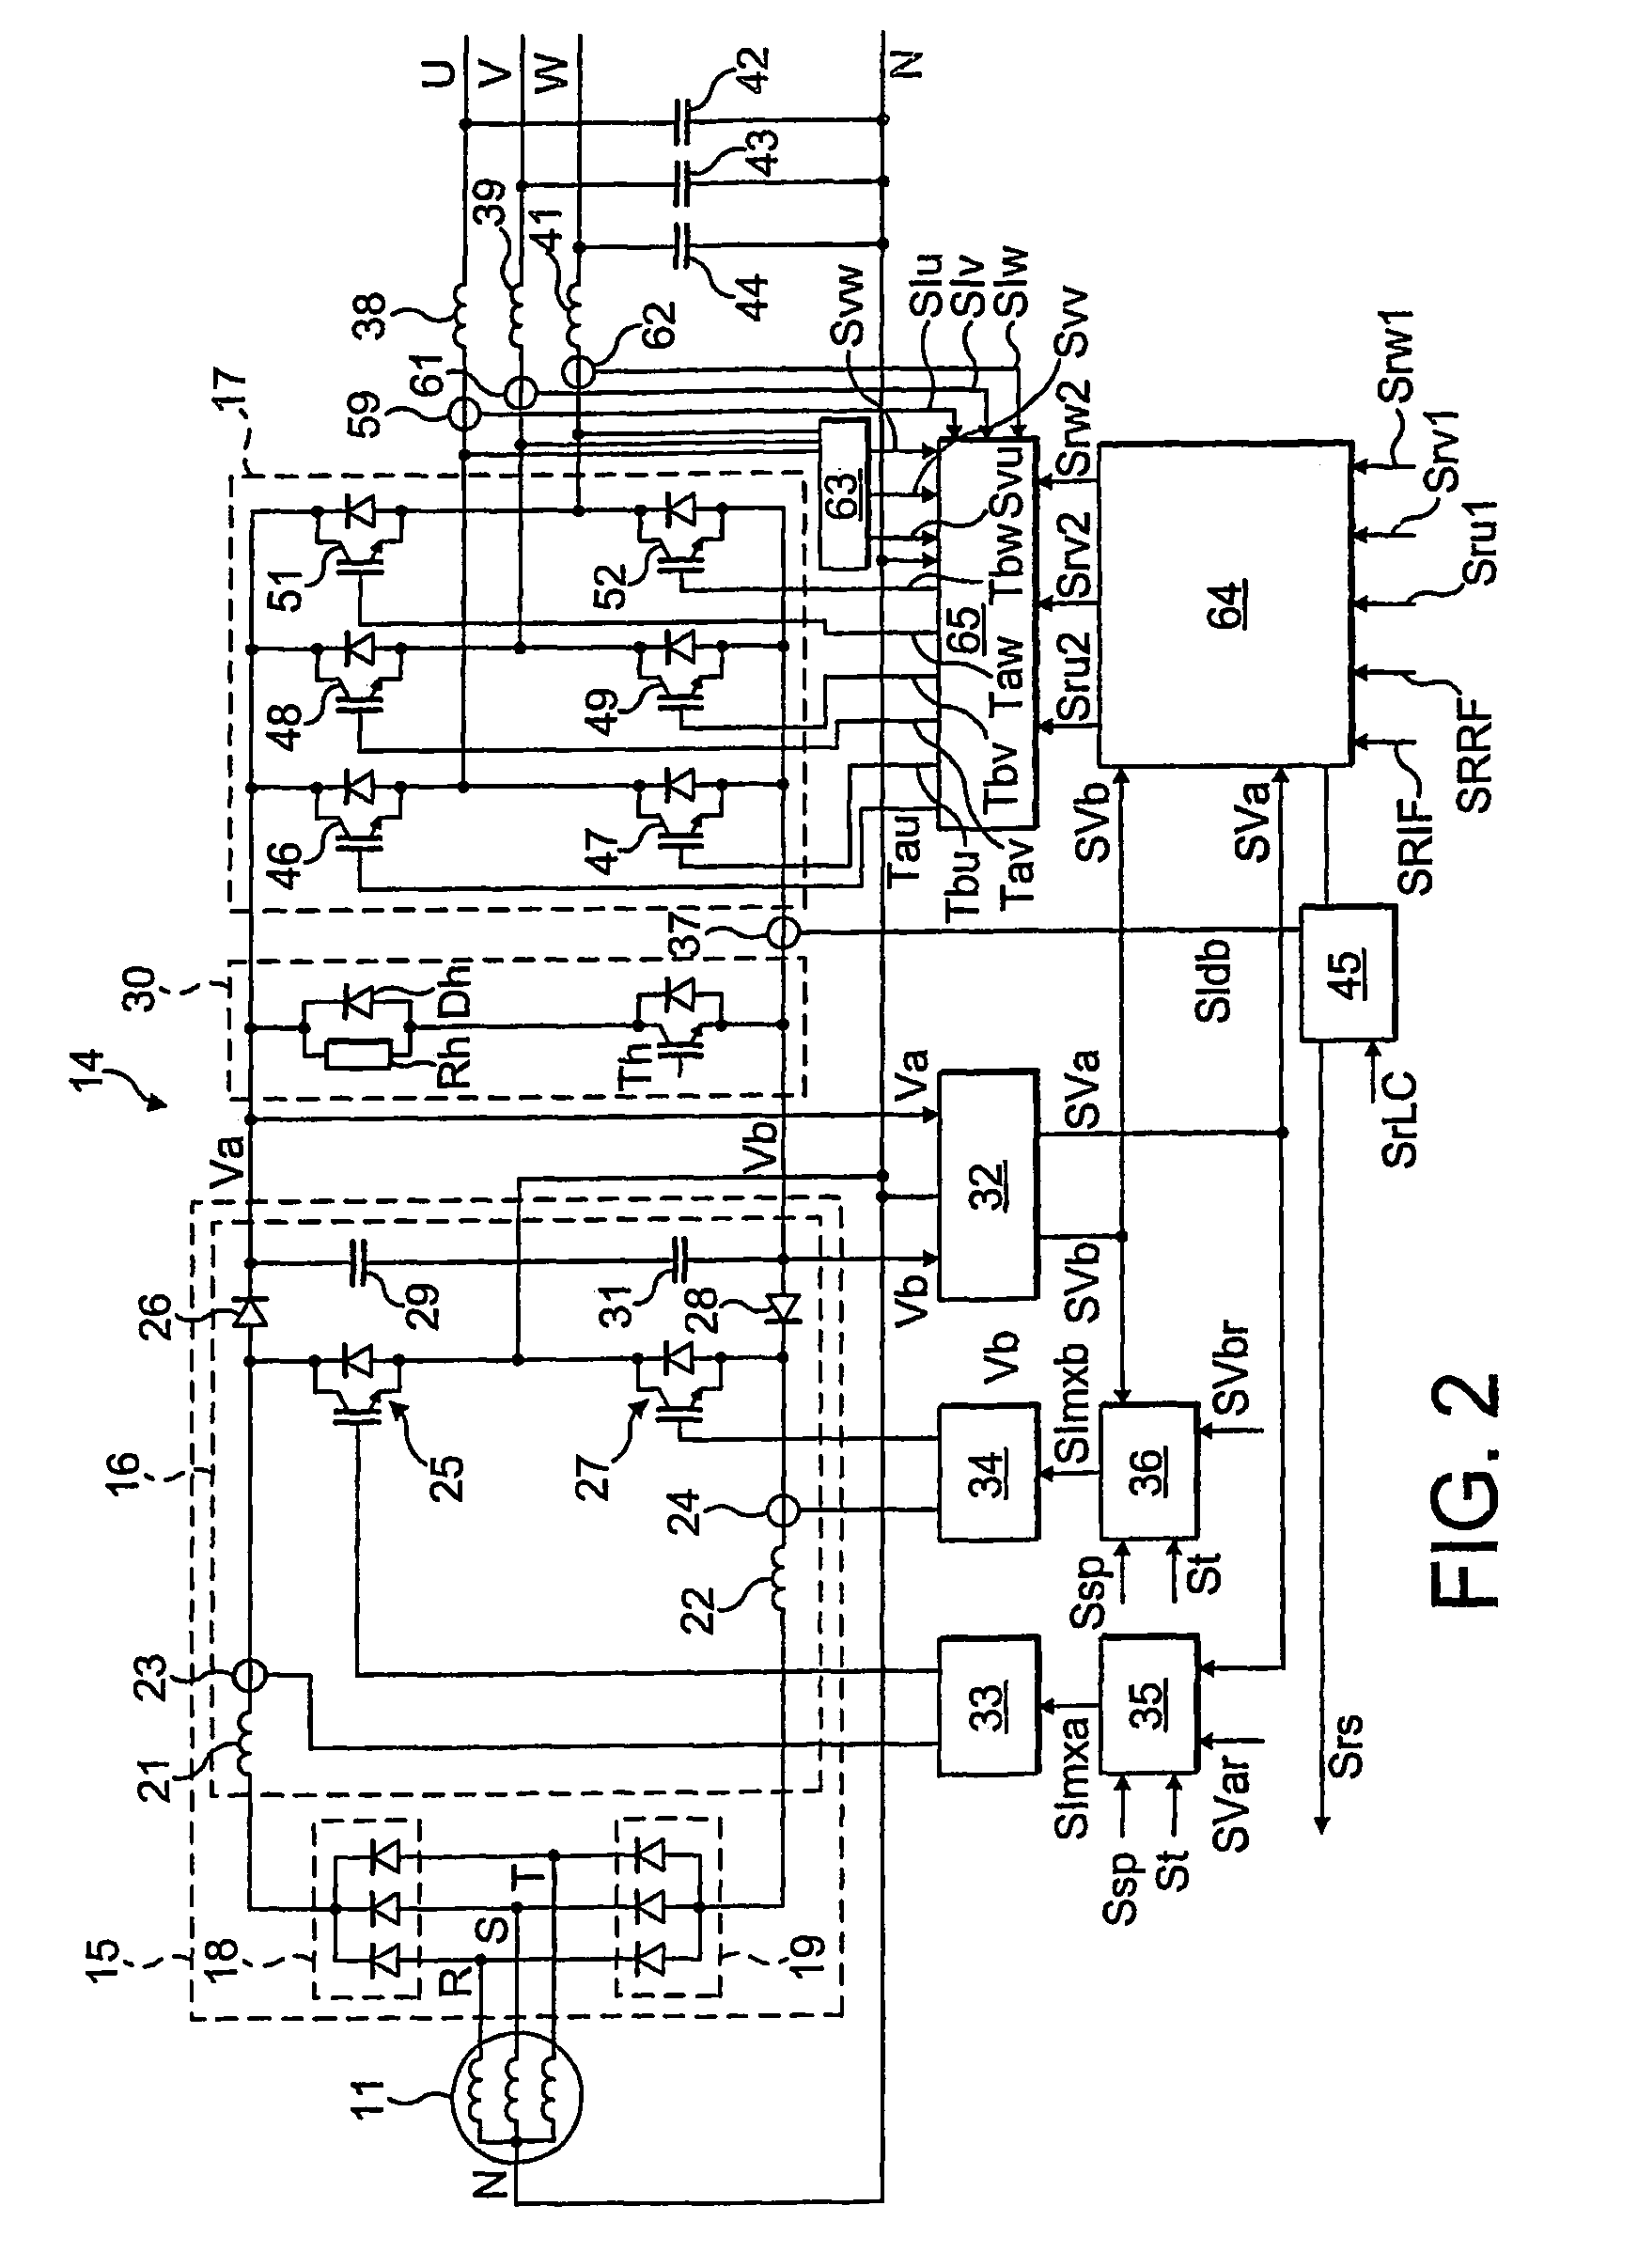 Electrical power supply system and a permanent magnet generator for such a system